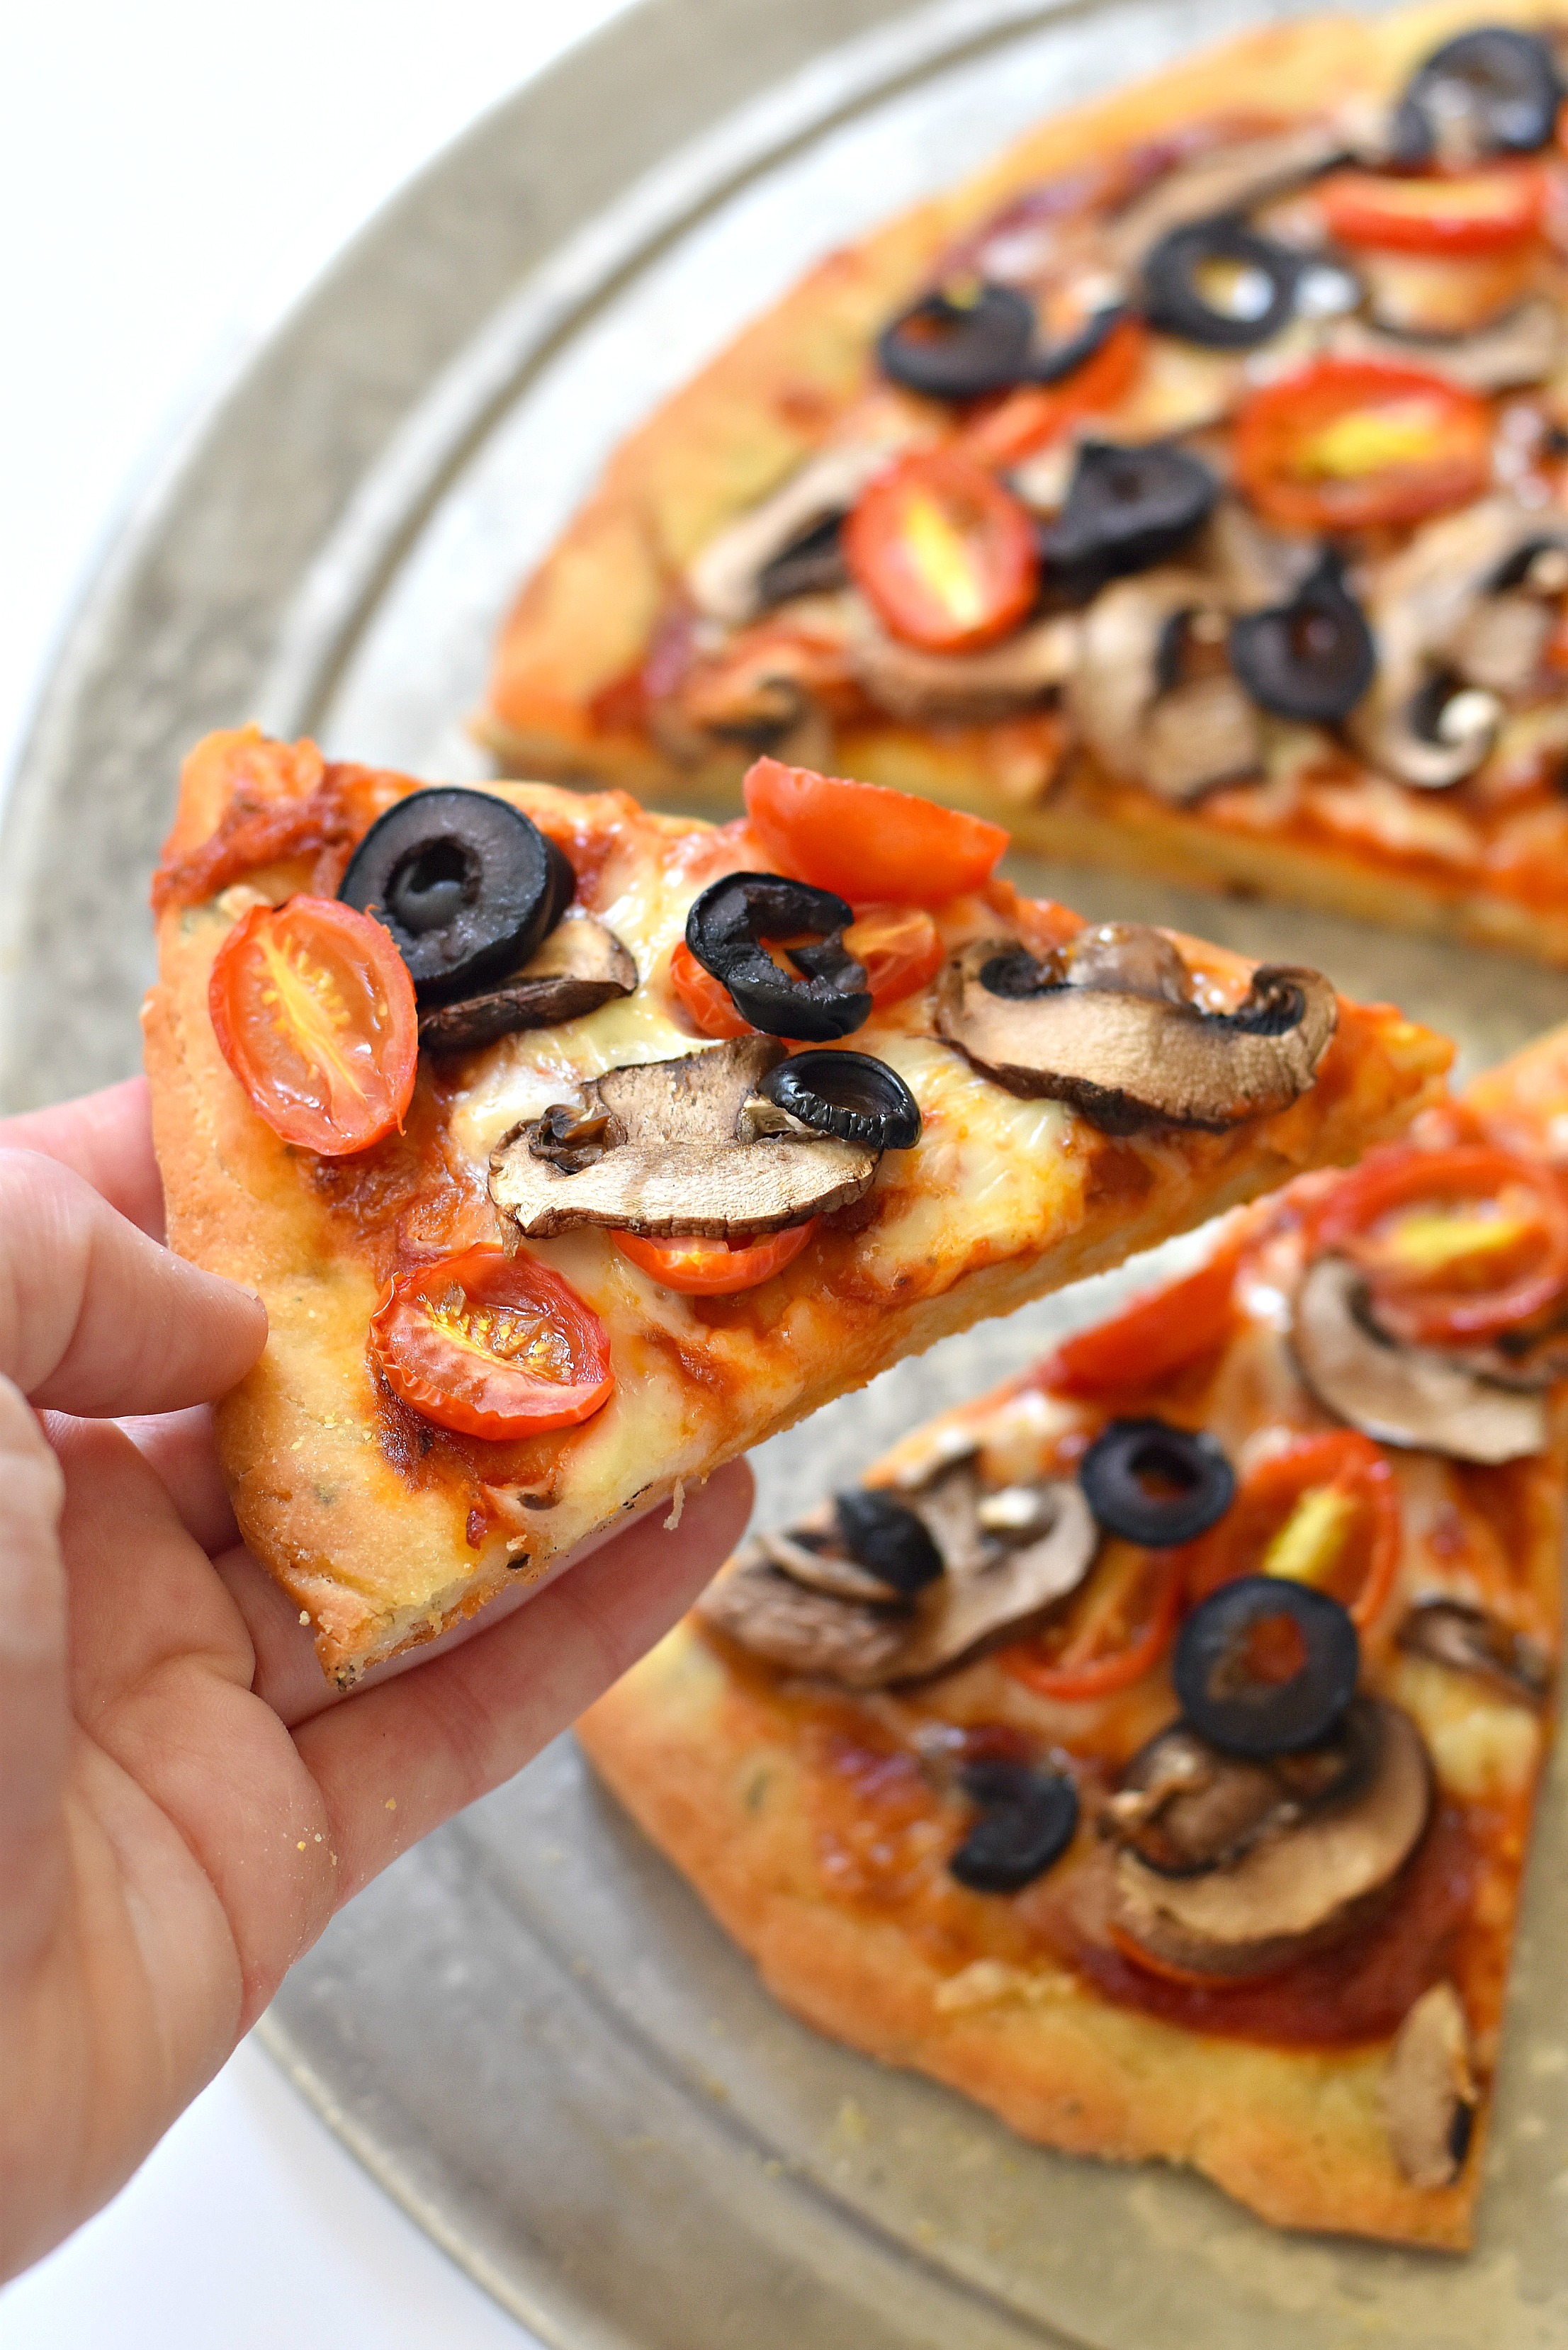 This Recipe For A Gluten Free Vegan Pizza Dough Makes For The Perfect